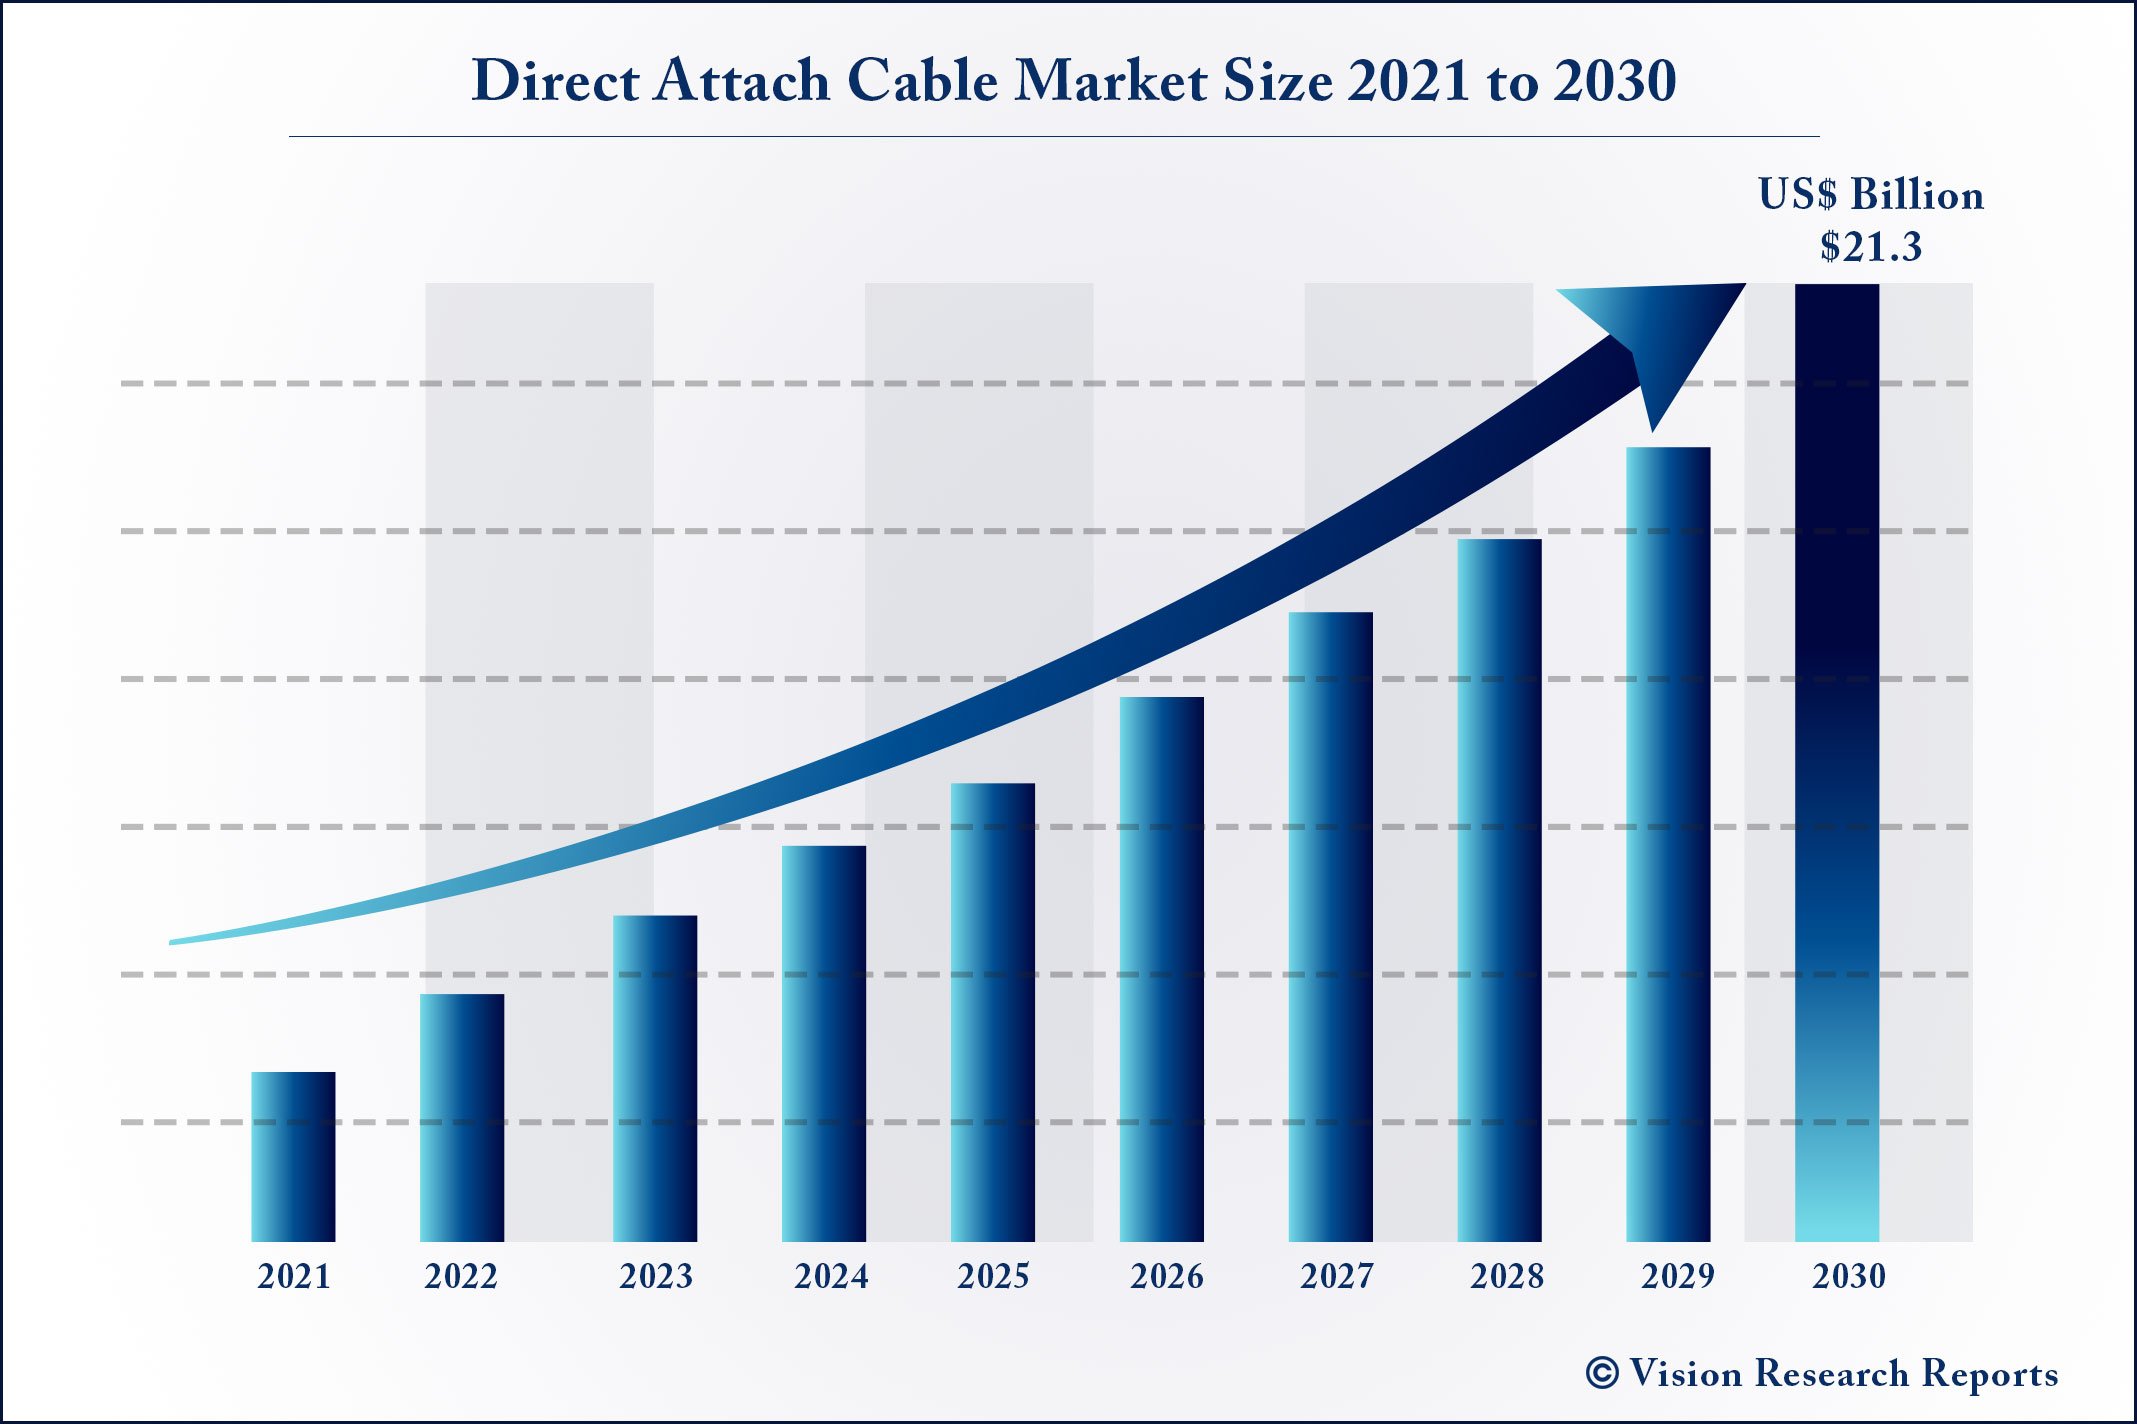 Direct Attach Cable Market Size 2021 to 2030